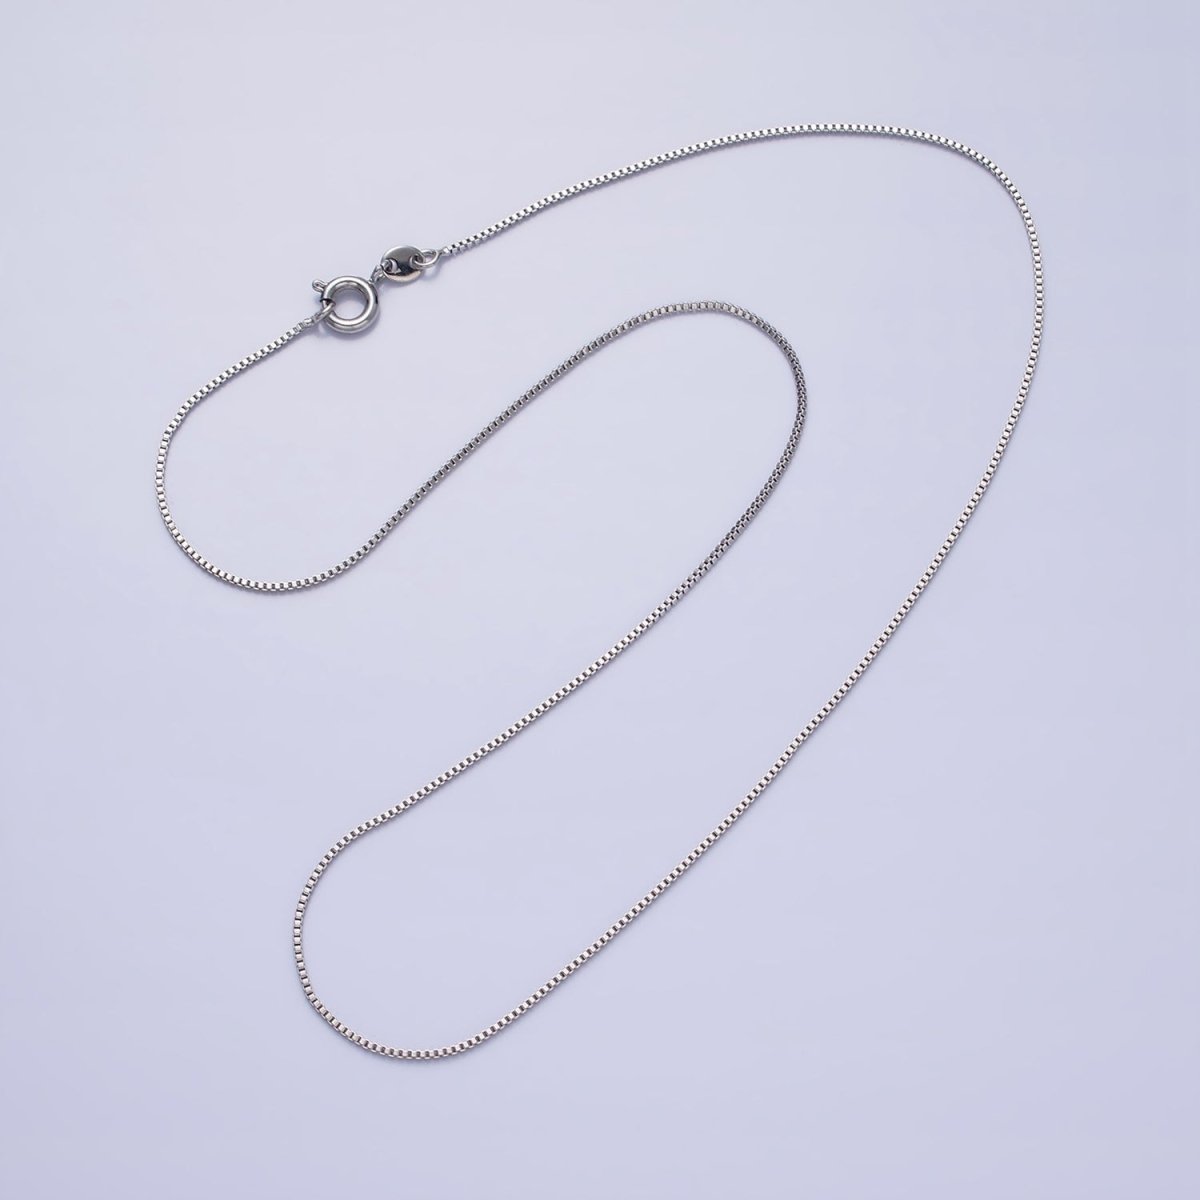 Dainty Box Chain Necklace 19.6 inch Long Ready to Wear Necklace in Silver | WA-1679 Clearance Pricing - DLUXCA